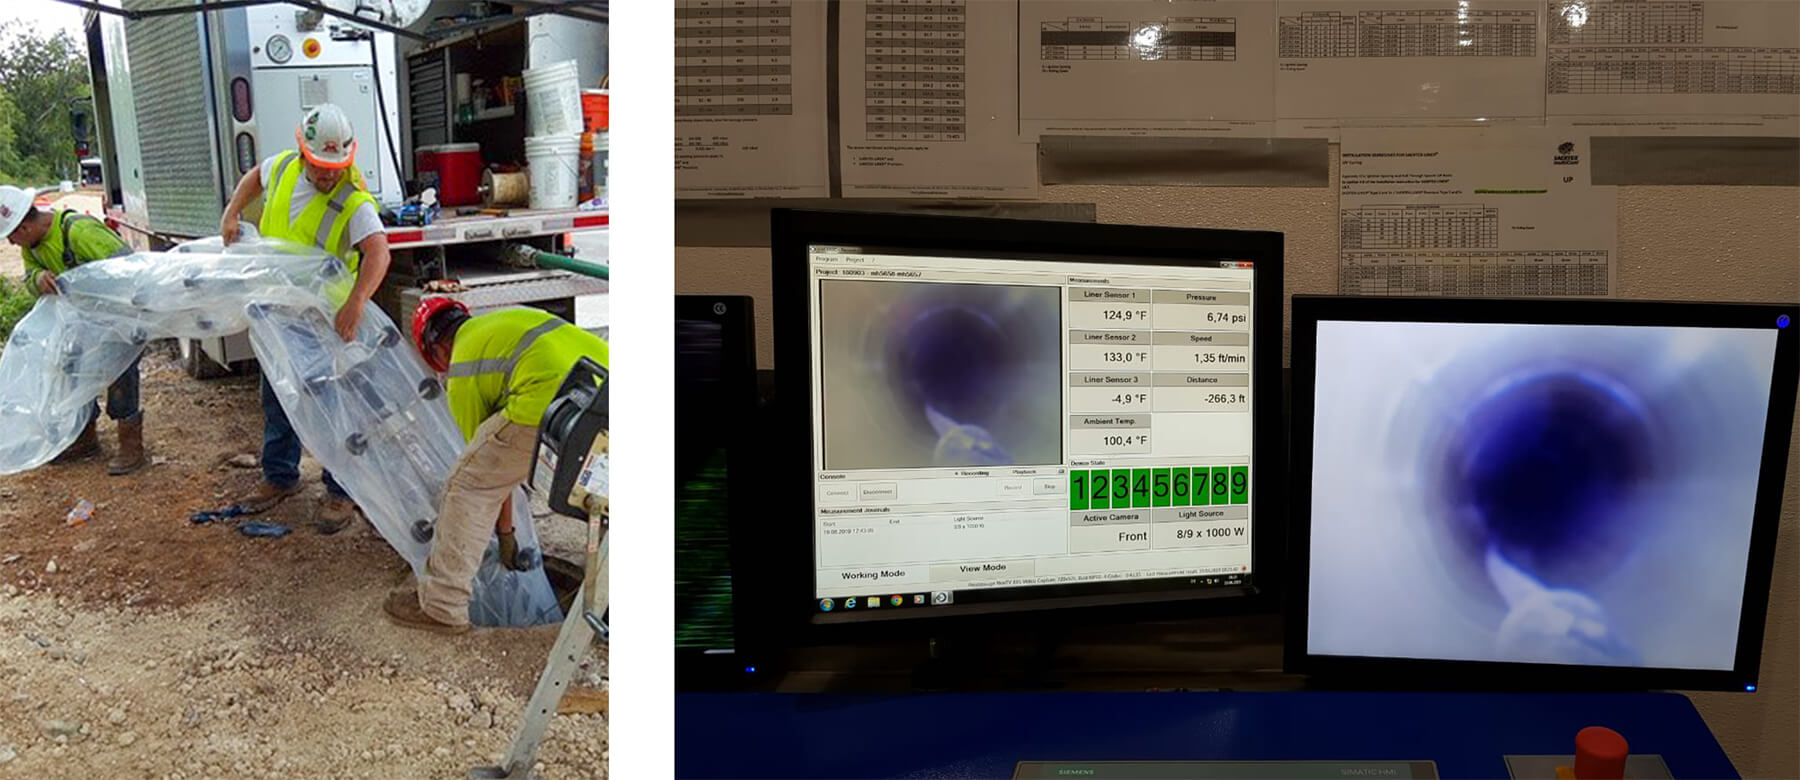 Left Image: Workers lowering cast-in-place pipe. Right image: Computer monitors show inside pipe as well as metrics.